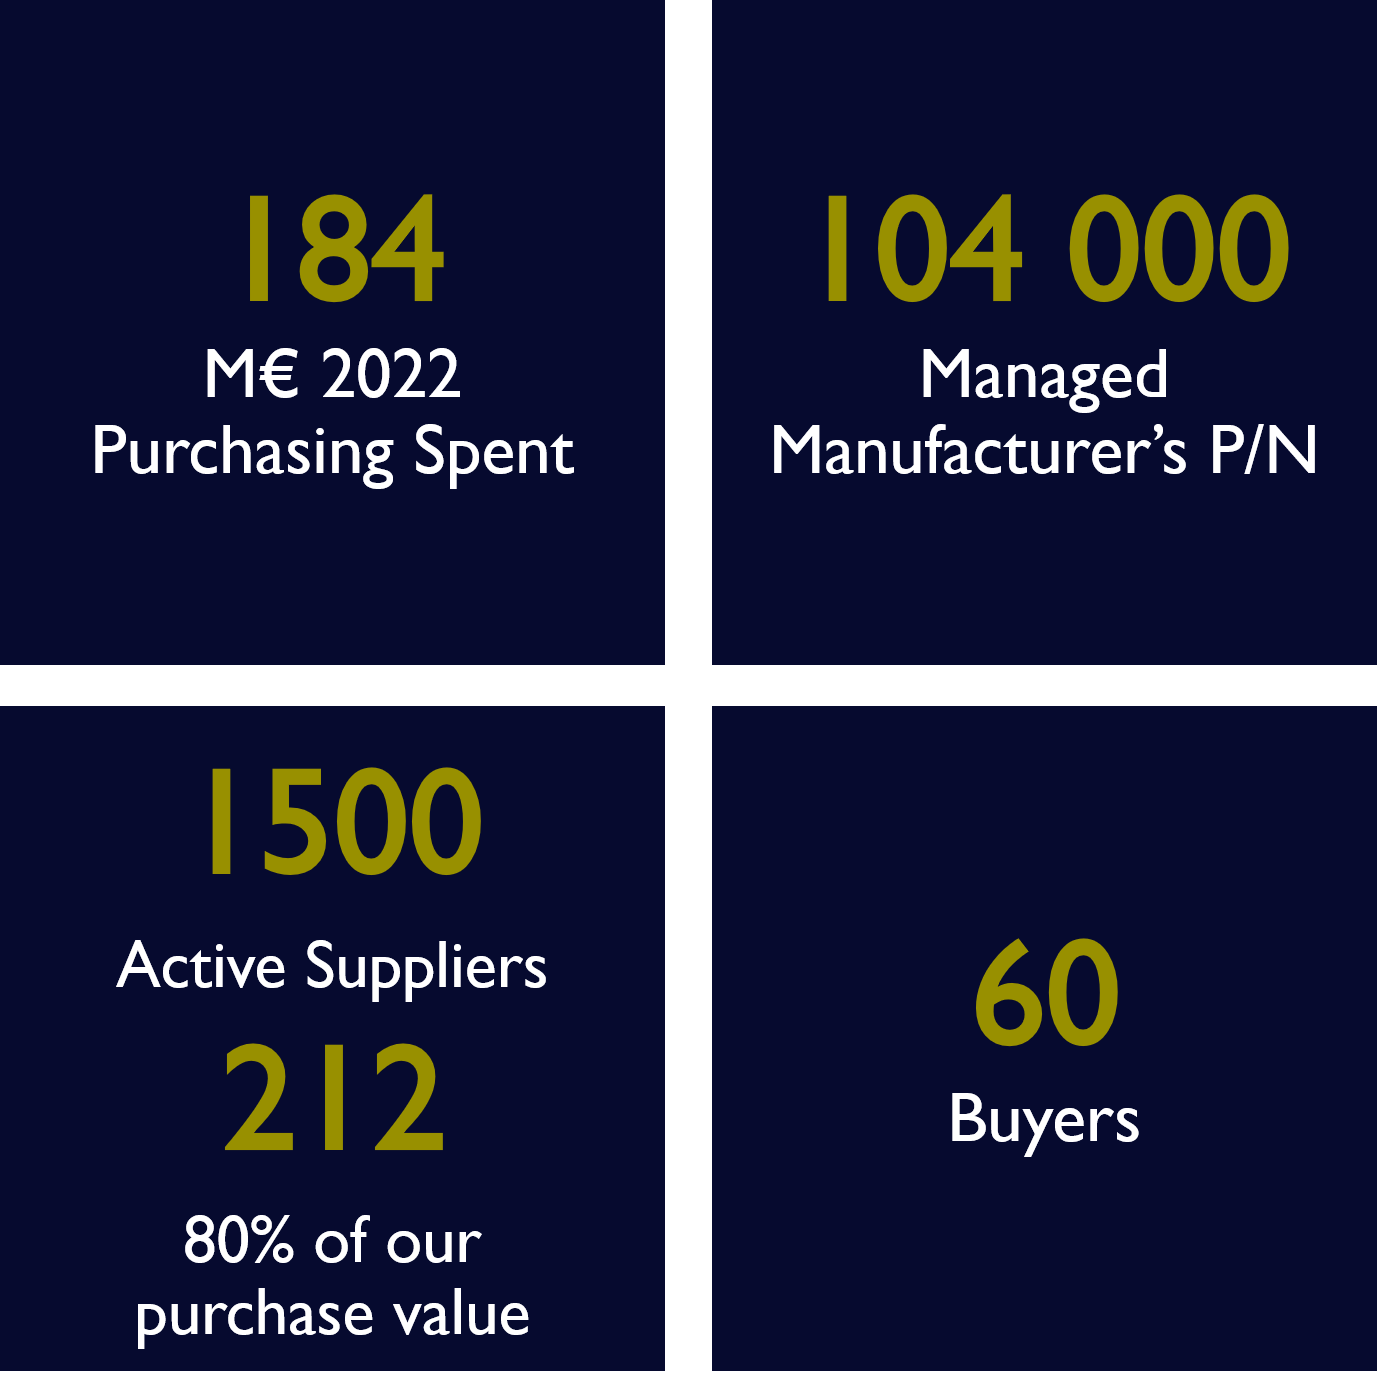 Key figures for the purchasing sector